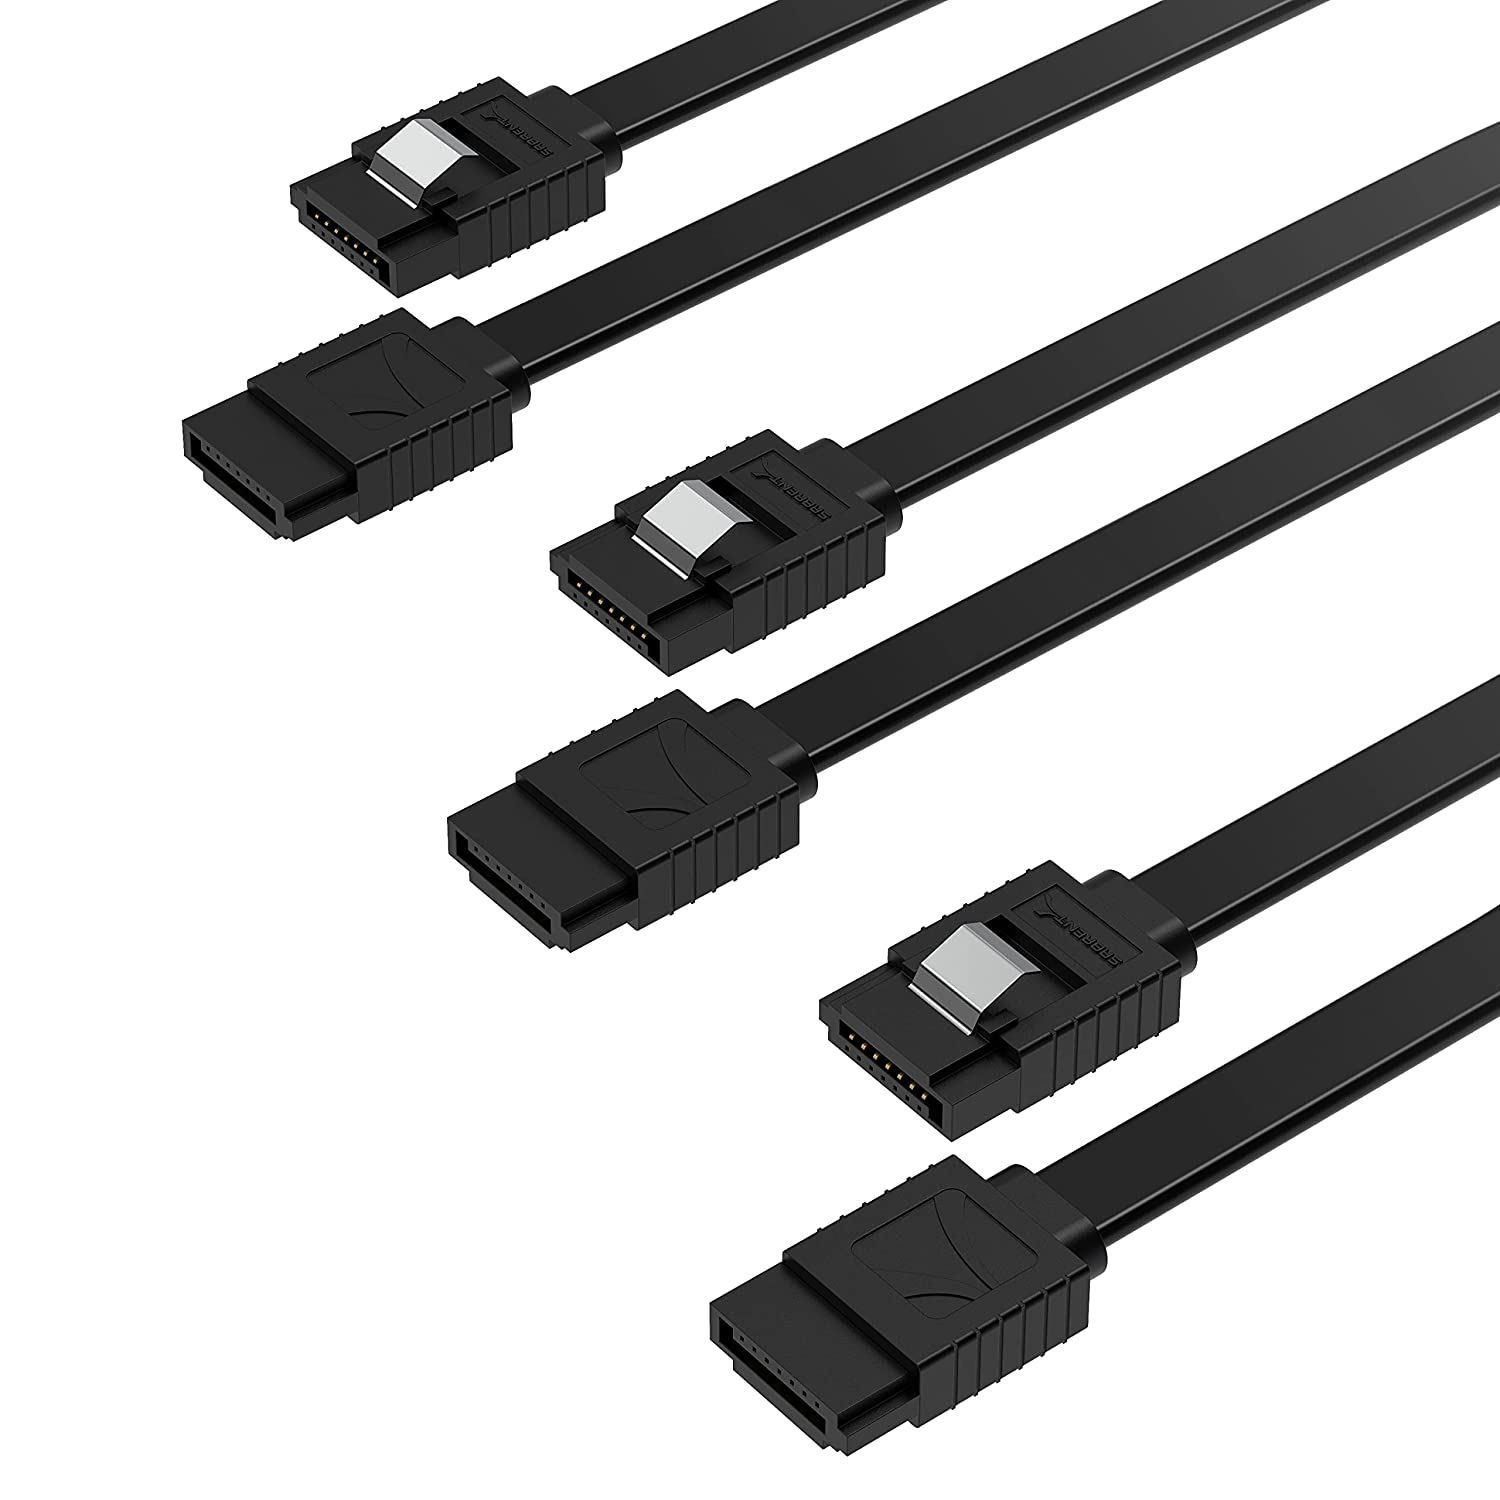 SABRENT SATA III (6 Gbit/s) Straight Data Cable with Locking Latch for HDD/SSD/CD and DVD Drives (3 Pack 20 Inch) in Blue (CB-SFB3)